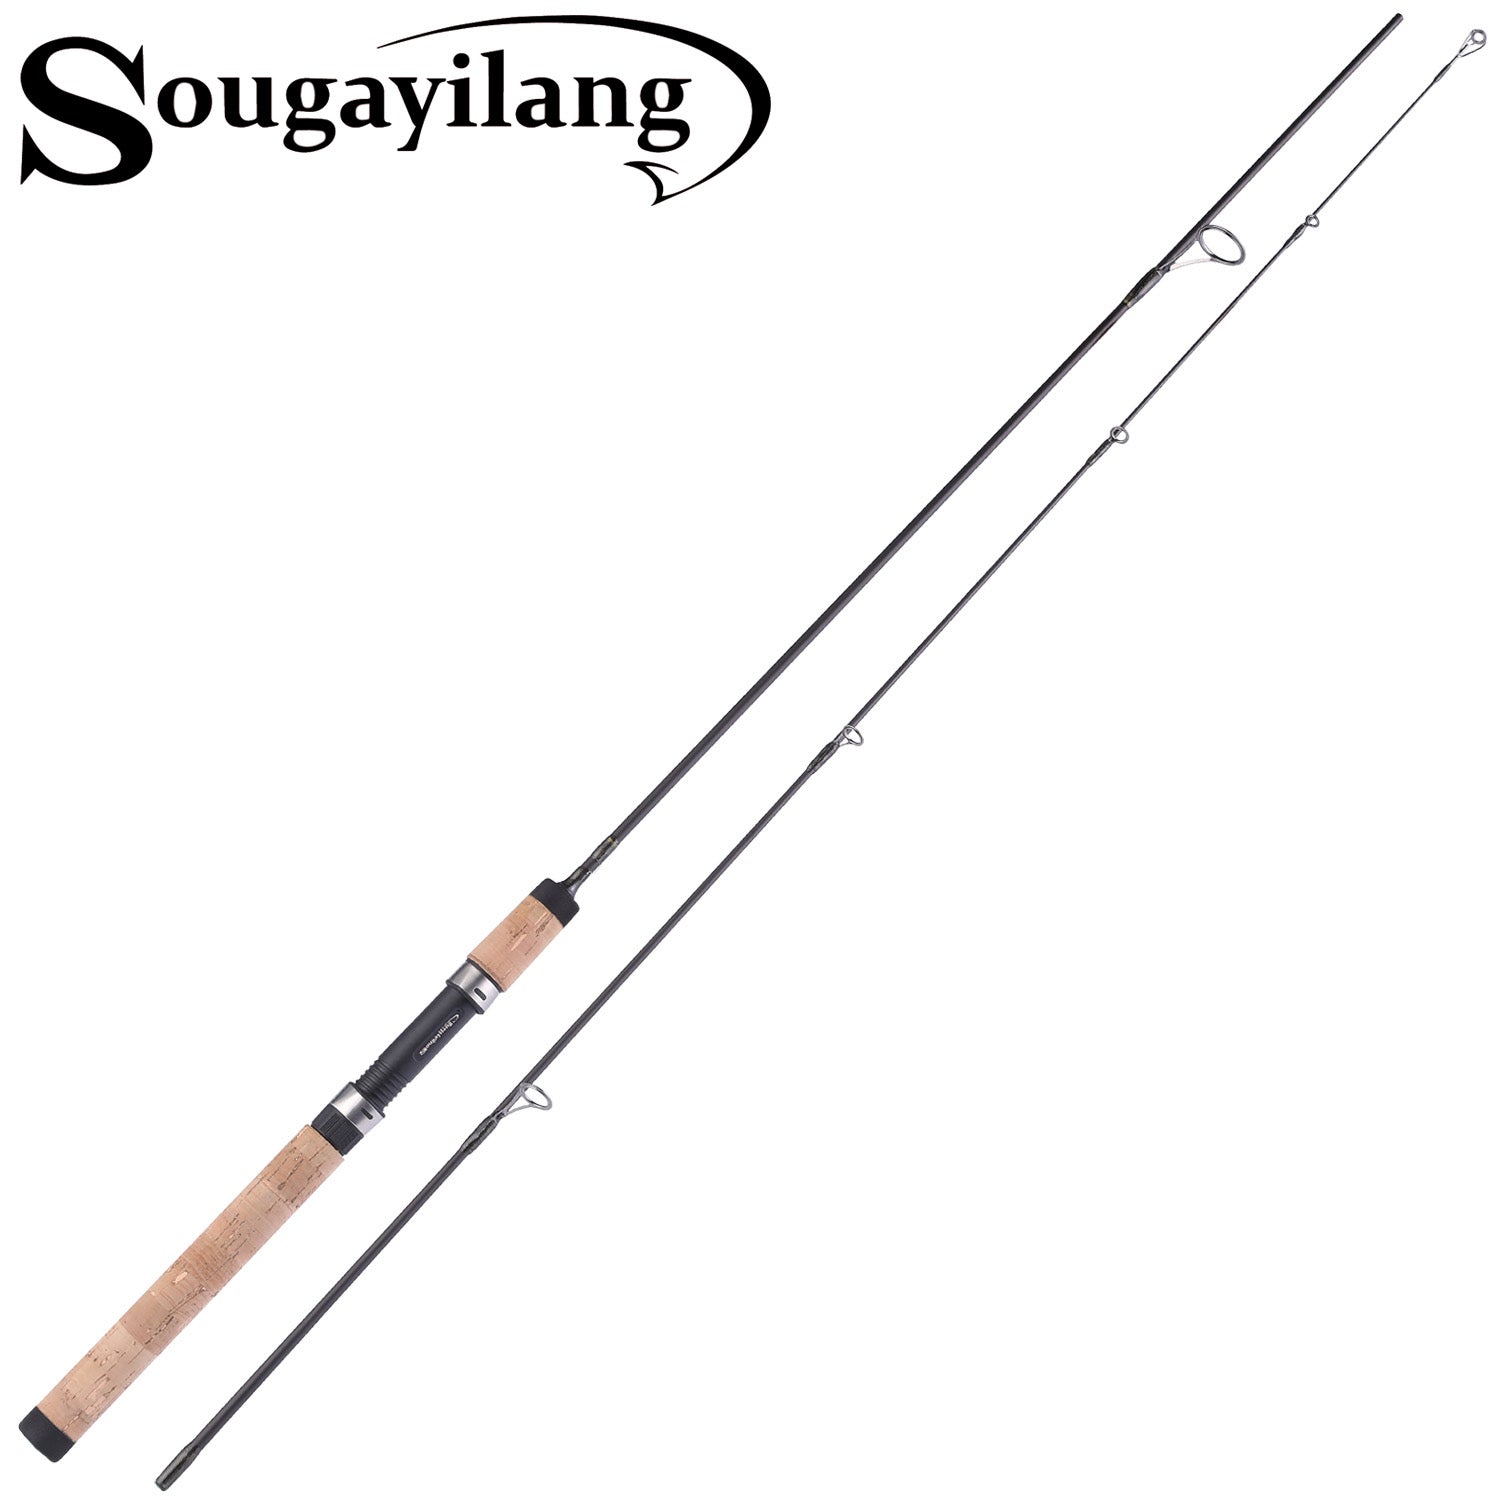 Sougayilang Fishing Rod, Lightweight Fishing Pole for Travel 4 Pieces  Saltwater Freshwater Rod-Green-1.8m-Spinning